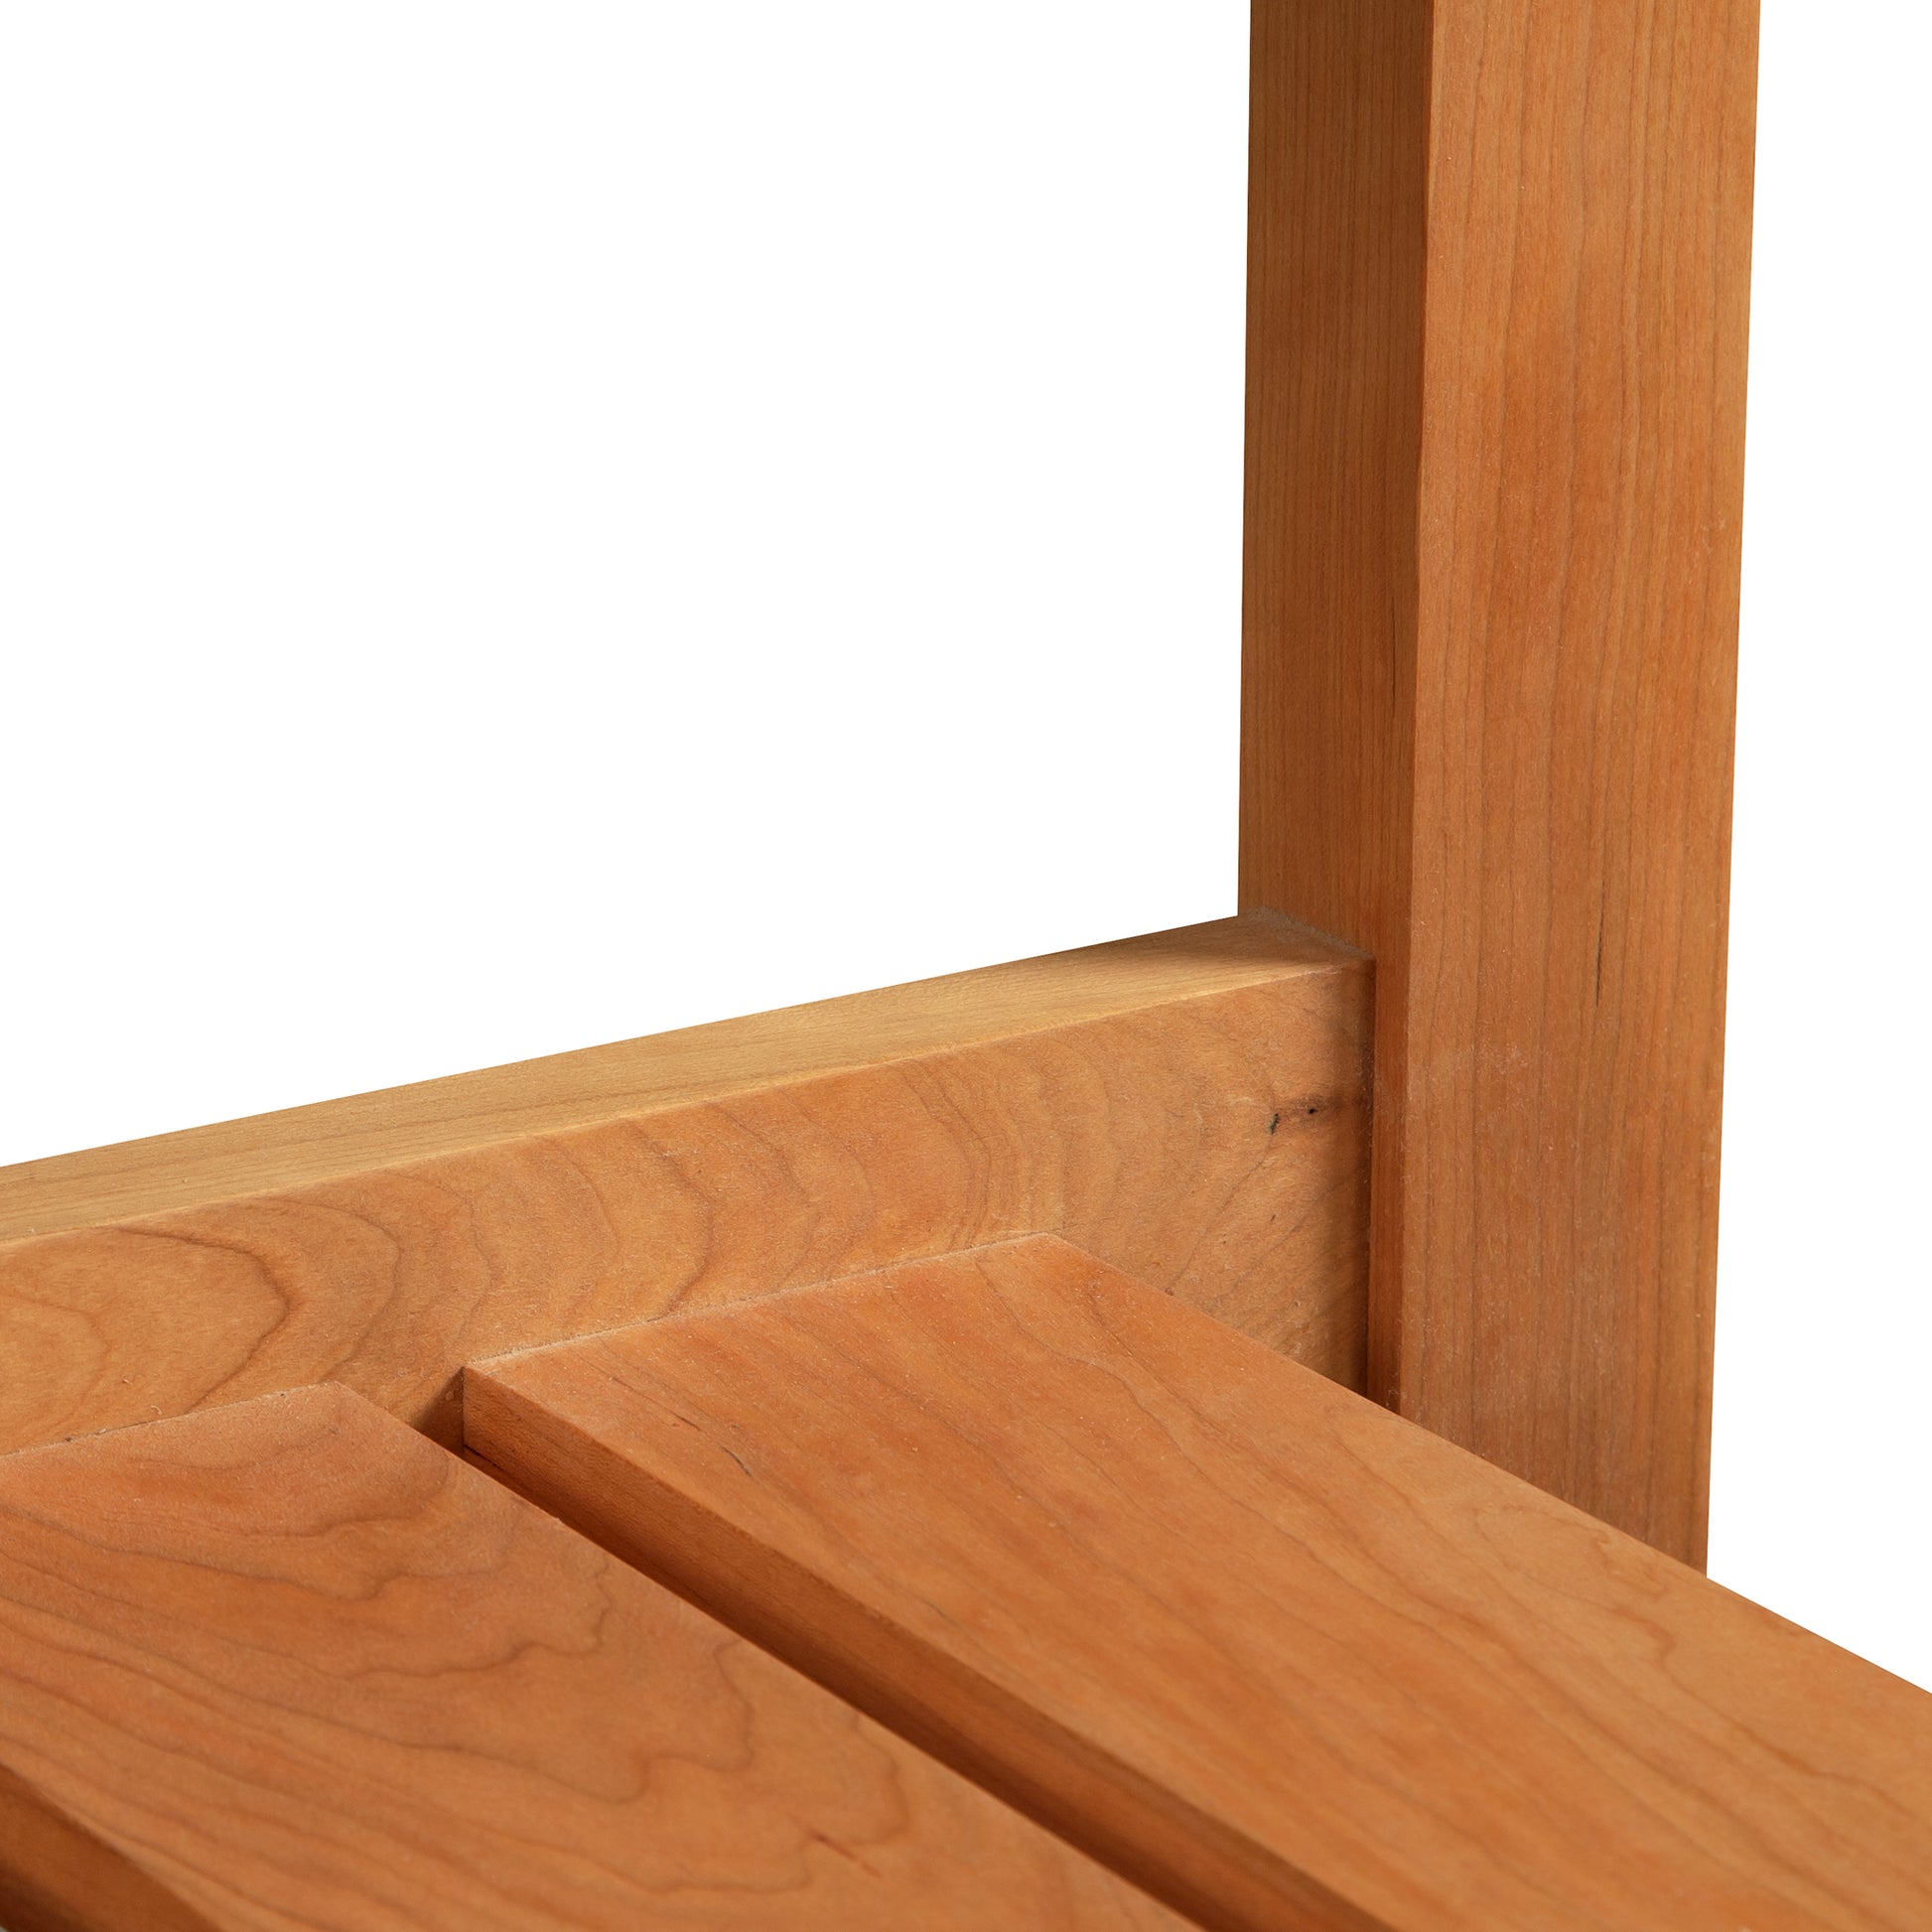 Close-up of a wooden frame corner from the Vermont Furniture Designs Burlington Shaker Lamp Table showing the grain and joints.